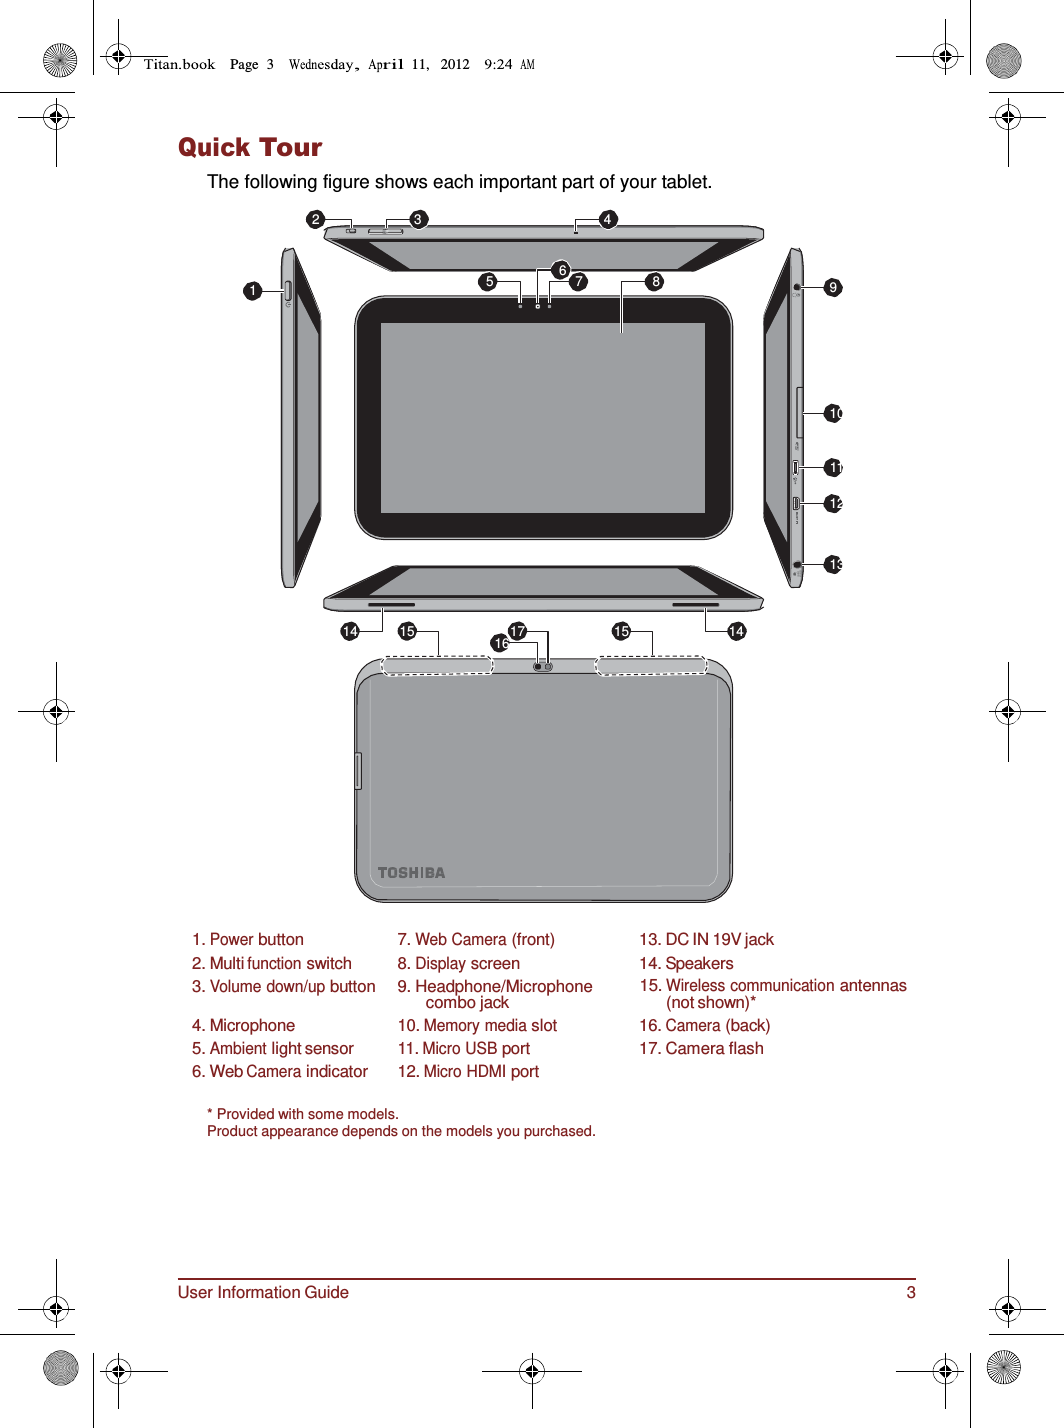 User Information Guide 3 Page  3        11,   2012       9    Quick Tour The following figure shows each important part of your tablet.  2  3  4   6 5  7  8 1      10   11  12   13   14 15 17 15 14 16              1. Power button  7. Web Camera (front)  13. DC IN 19V jack 2. Multi function switch  8. Display screen  14. Speakers 3. Volume down/up button  9. Headphone/Microphone combo jack 15. Wireless communication antennas (not shown)* 4. Microphone  10. Memory media slot  16. Camera (back) 5. Ambient light sensor  11. Micro USB port  17. Camera flash 6. Web Camera indicator  12. Micro HDMI port  * Provided with some models. Product appearance depends on the models you purchased. 